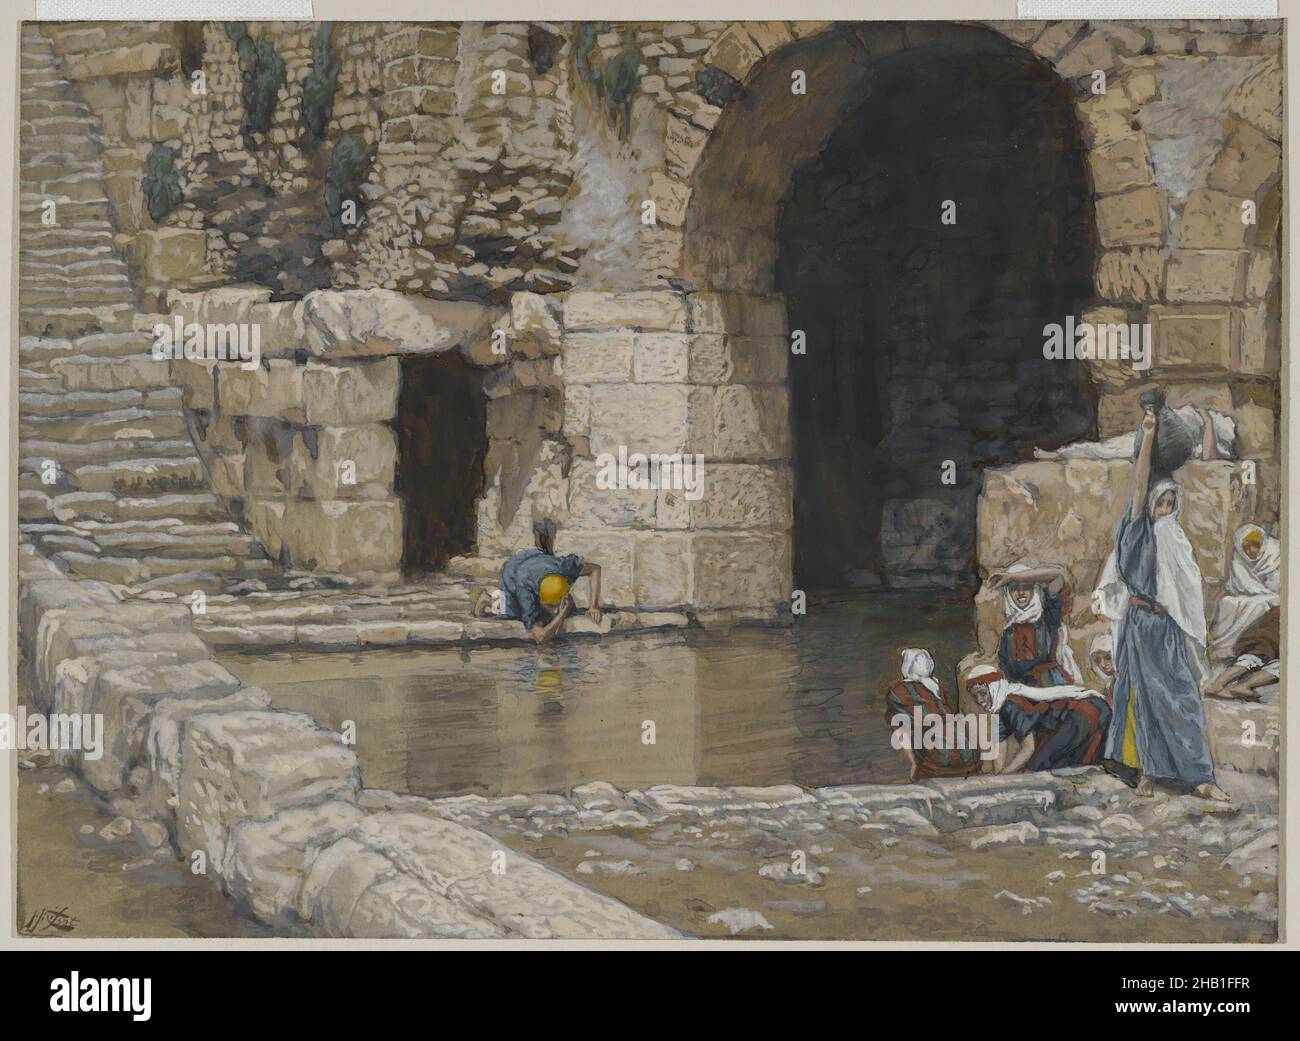 The Blind Man Washes in the Pool of Siloam, Le aveugle-né se lave à la piscine de Siloë, The Life of Our Lord Jesus Christ, La Vie de Notre-Seigneur Jésus-Christ, James Tissot, French, 1836-1902, Opaque watercolor over graphite on gray wove paper, France, 1886-1894, Image: 5 9/16 x 7 11/16 in., 14.1 x 19.5 cm, arch, Bible, Biblical, building, Catholicism, Christ, Christianity, French, Jesus, John 9:7, New Testament, Opaque watercolor over graphite on gray wove paper, pool, Pool of Siloam, Religion, Religious, stone structure, urn, vessel, water Stock Photo